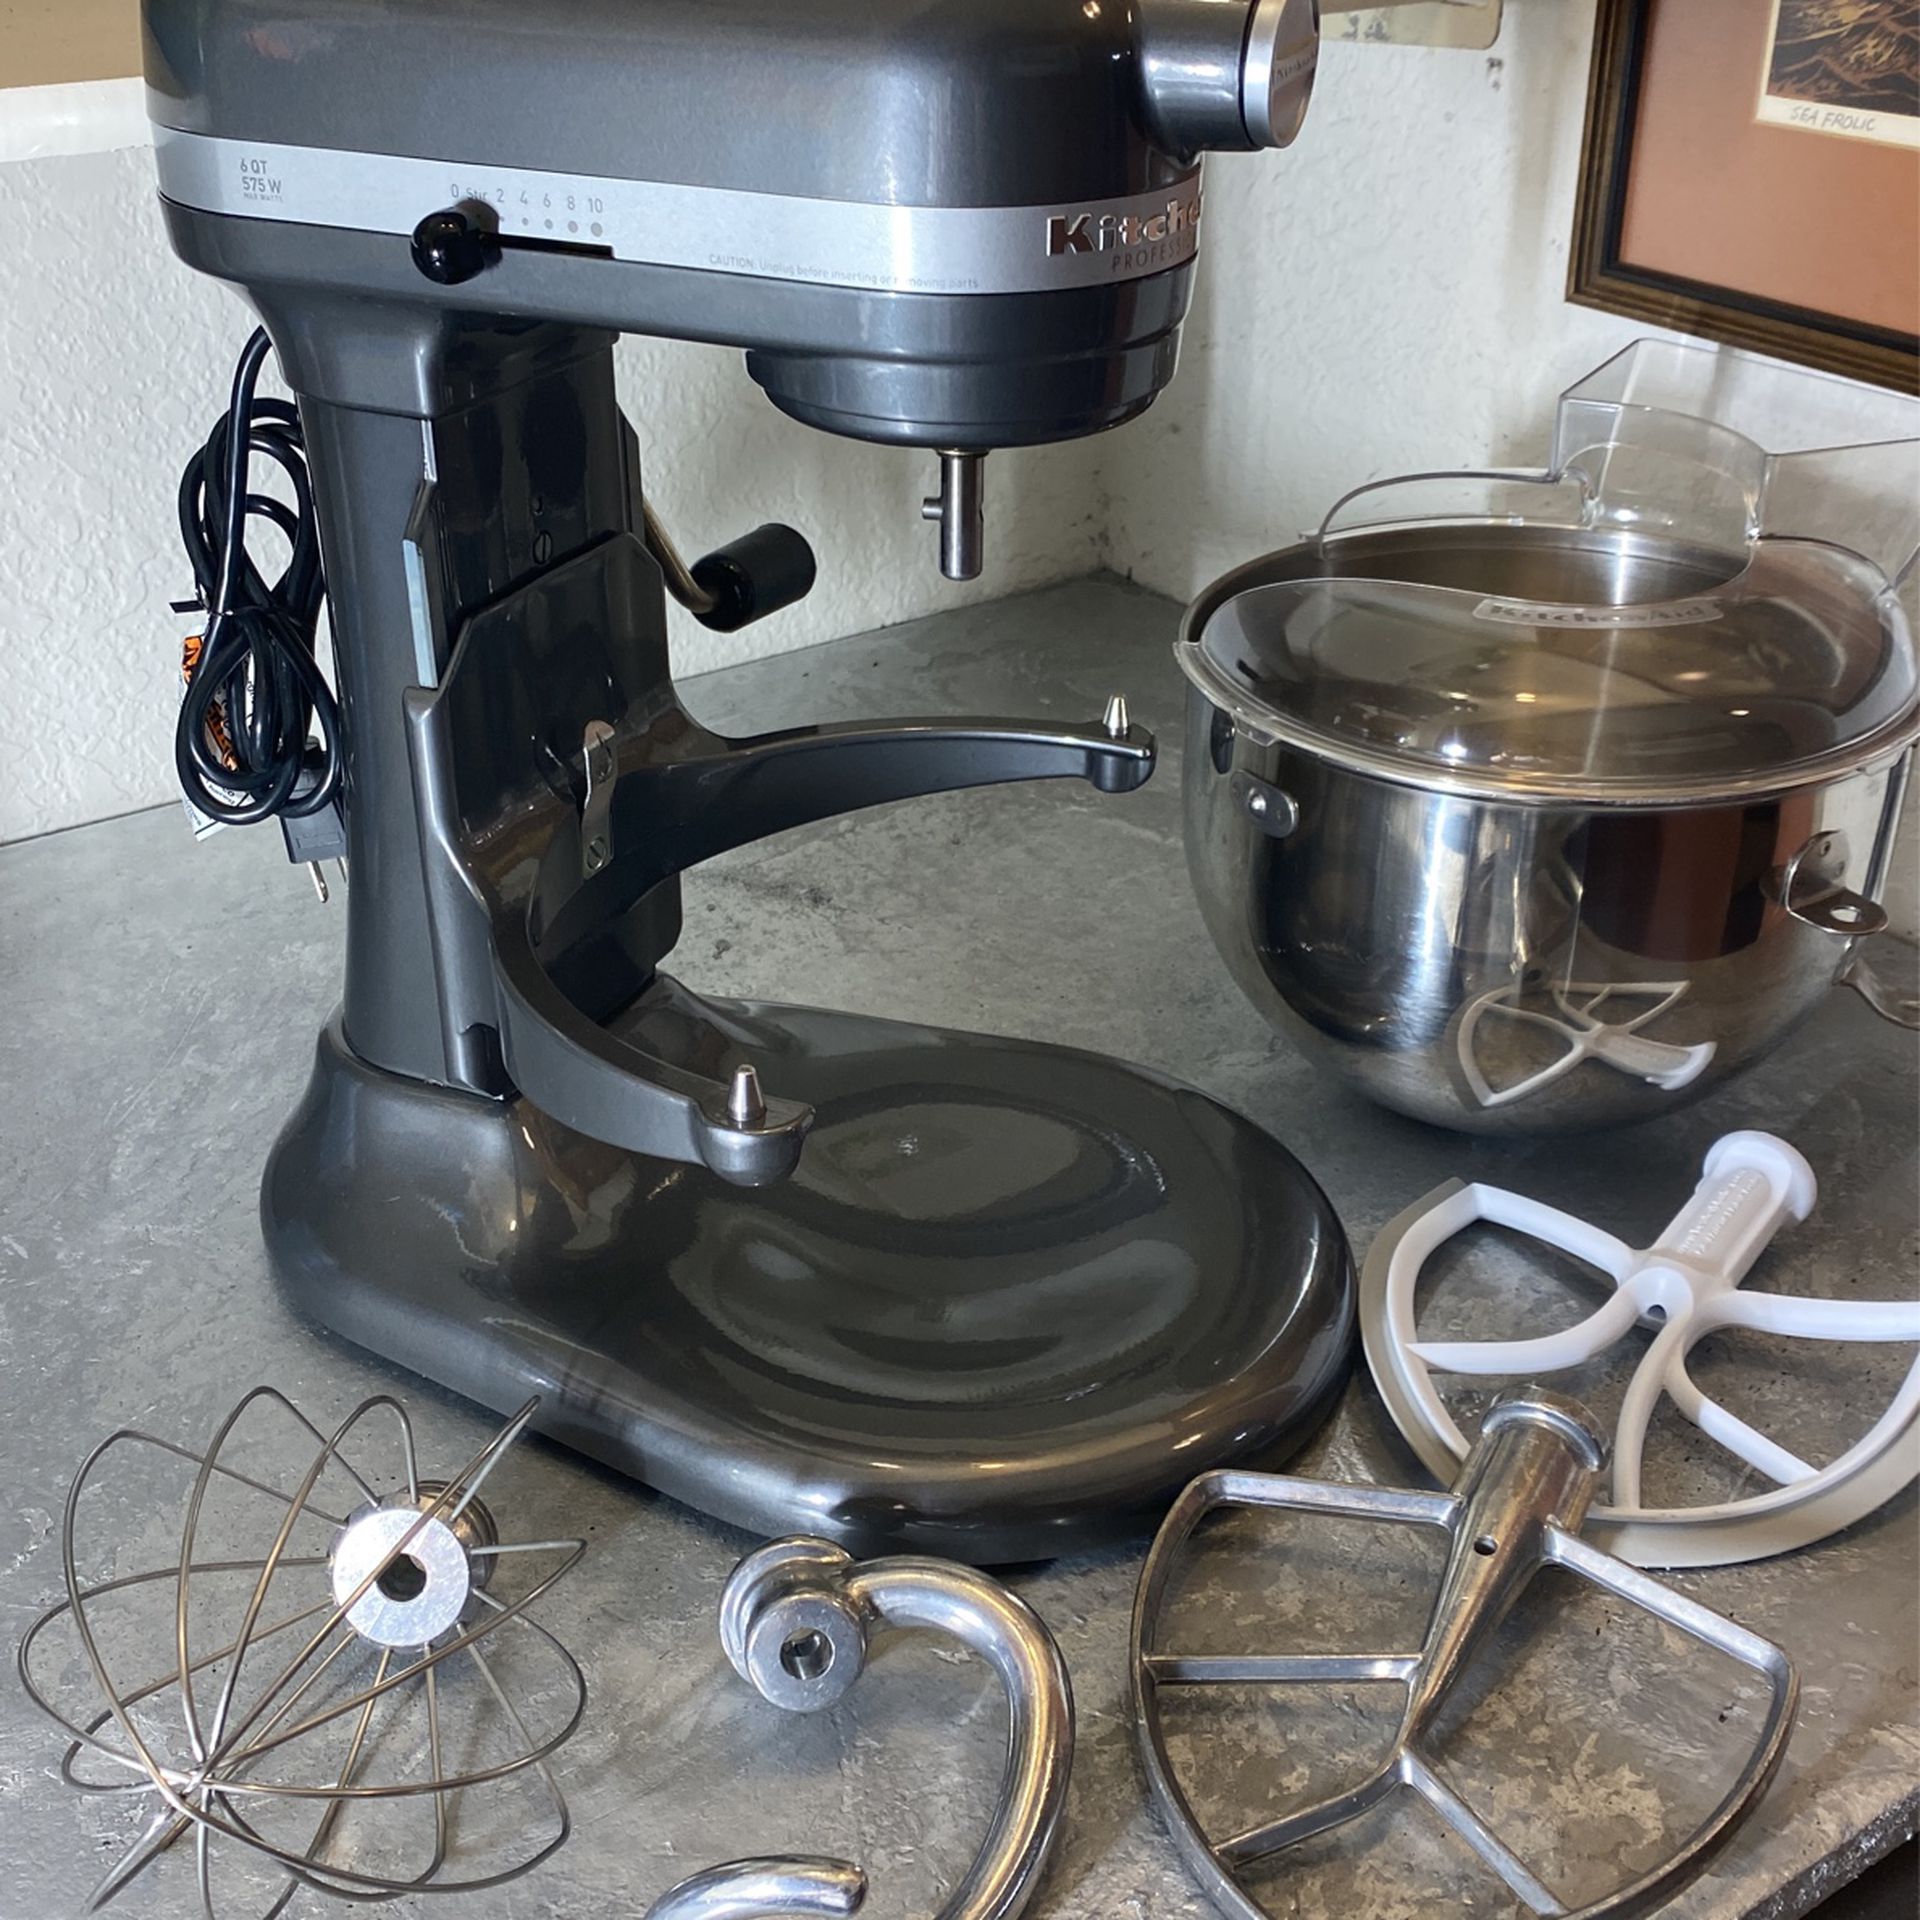 KitchenAid Stand Mixer Pro Series 7 qt Bowl & 7 Attachments (Dough + Flat  Beaters + Whisk) & 5-Blade Spiralizer for Sale in Sarasota, FL - OfferUp